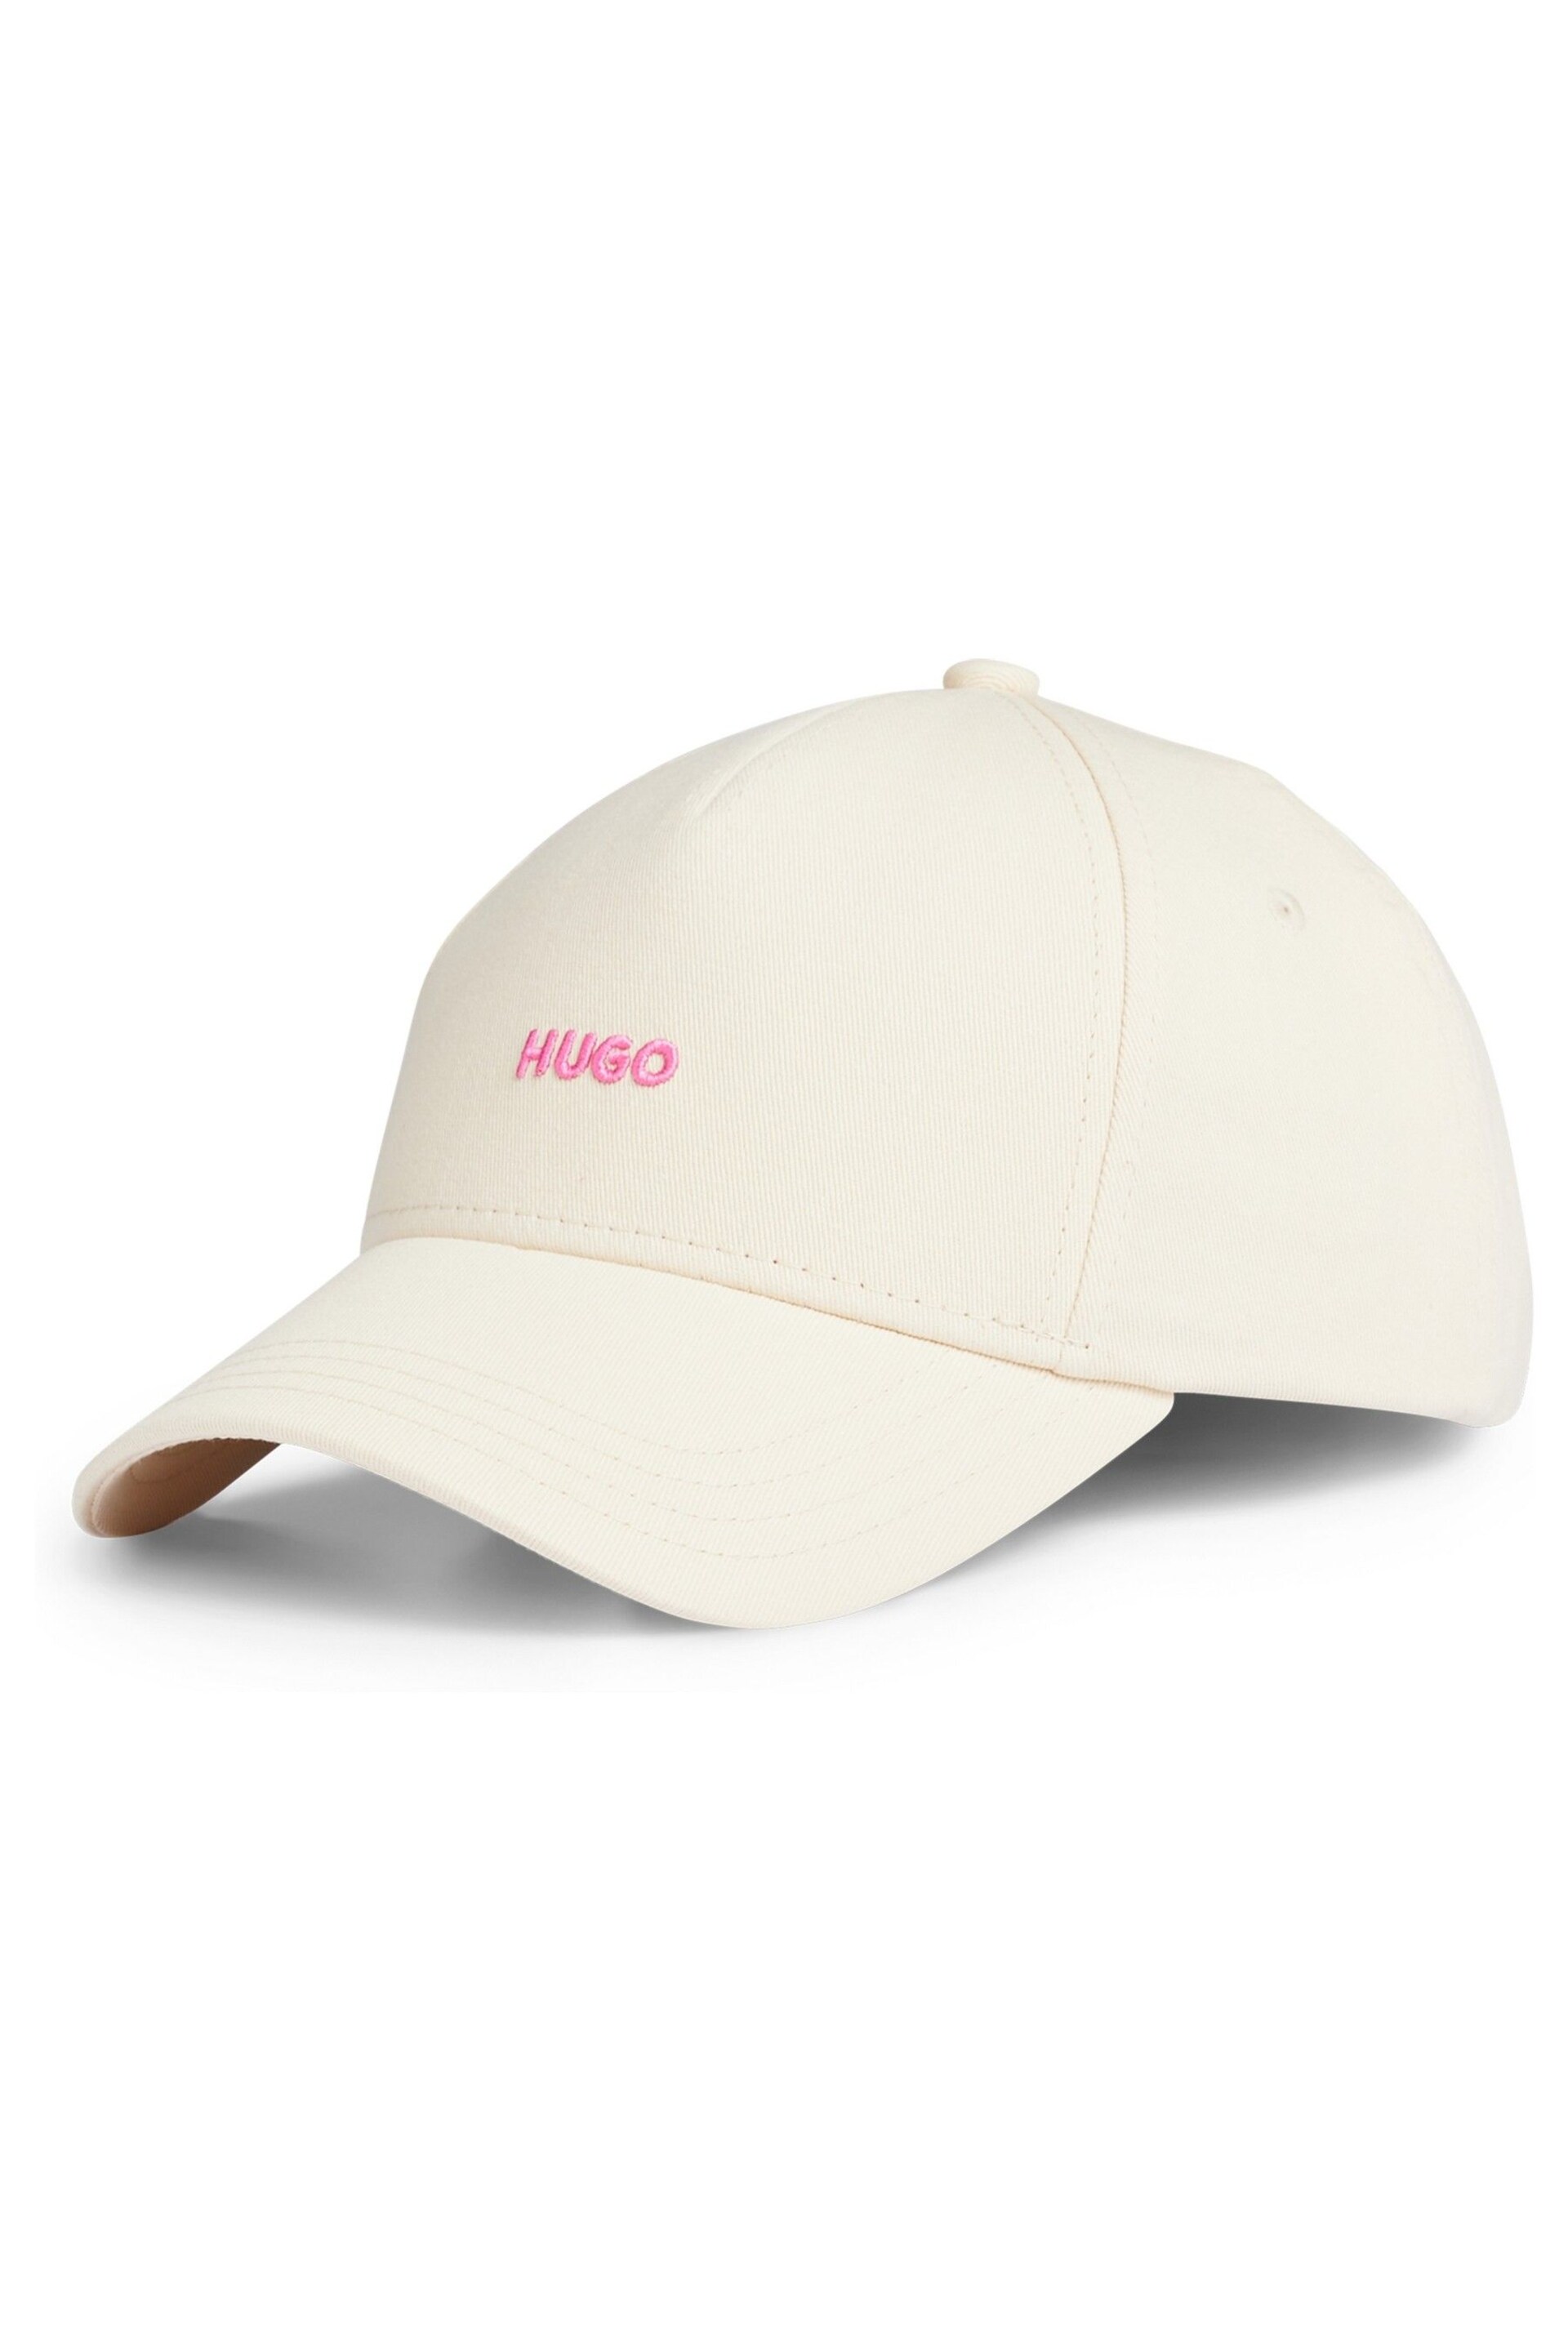 HUGO Natural Cotton Twill Cap With Embroidered Logo - Image 3 of 5